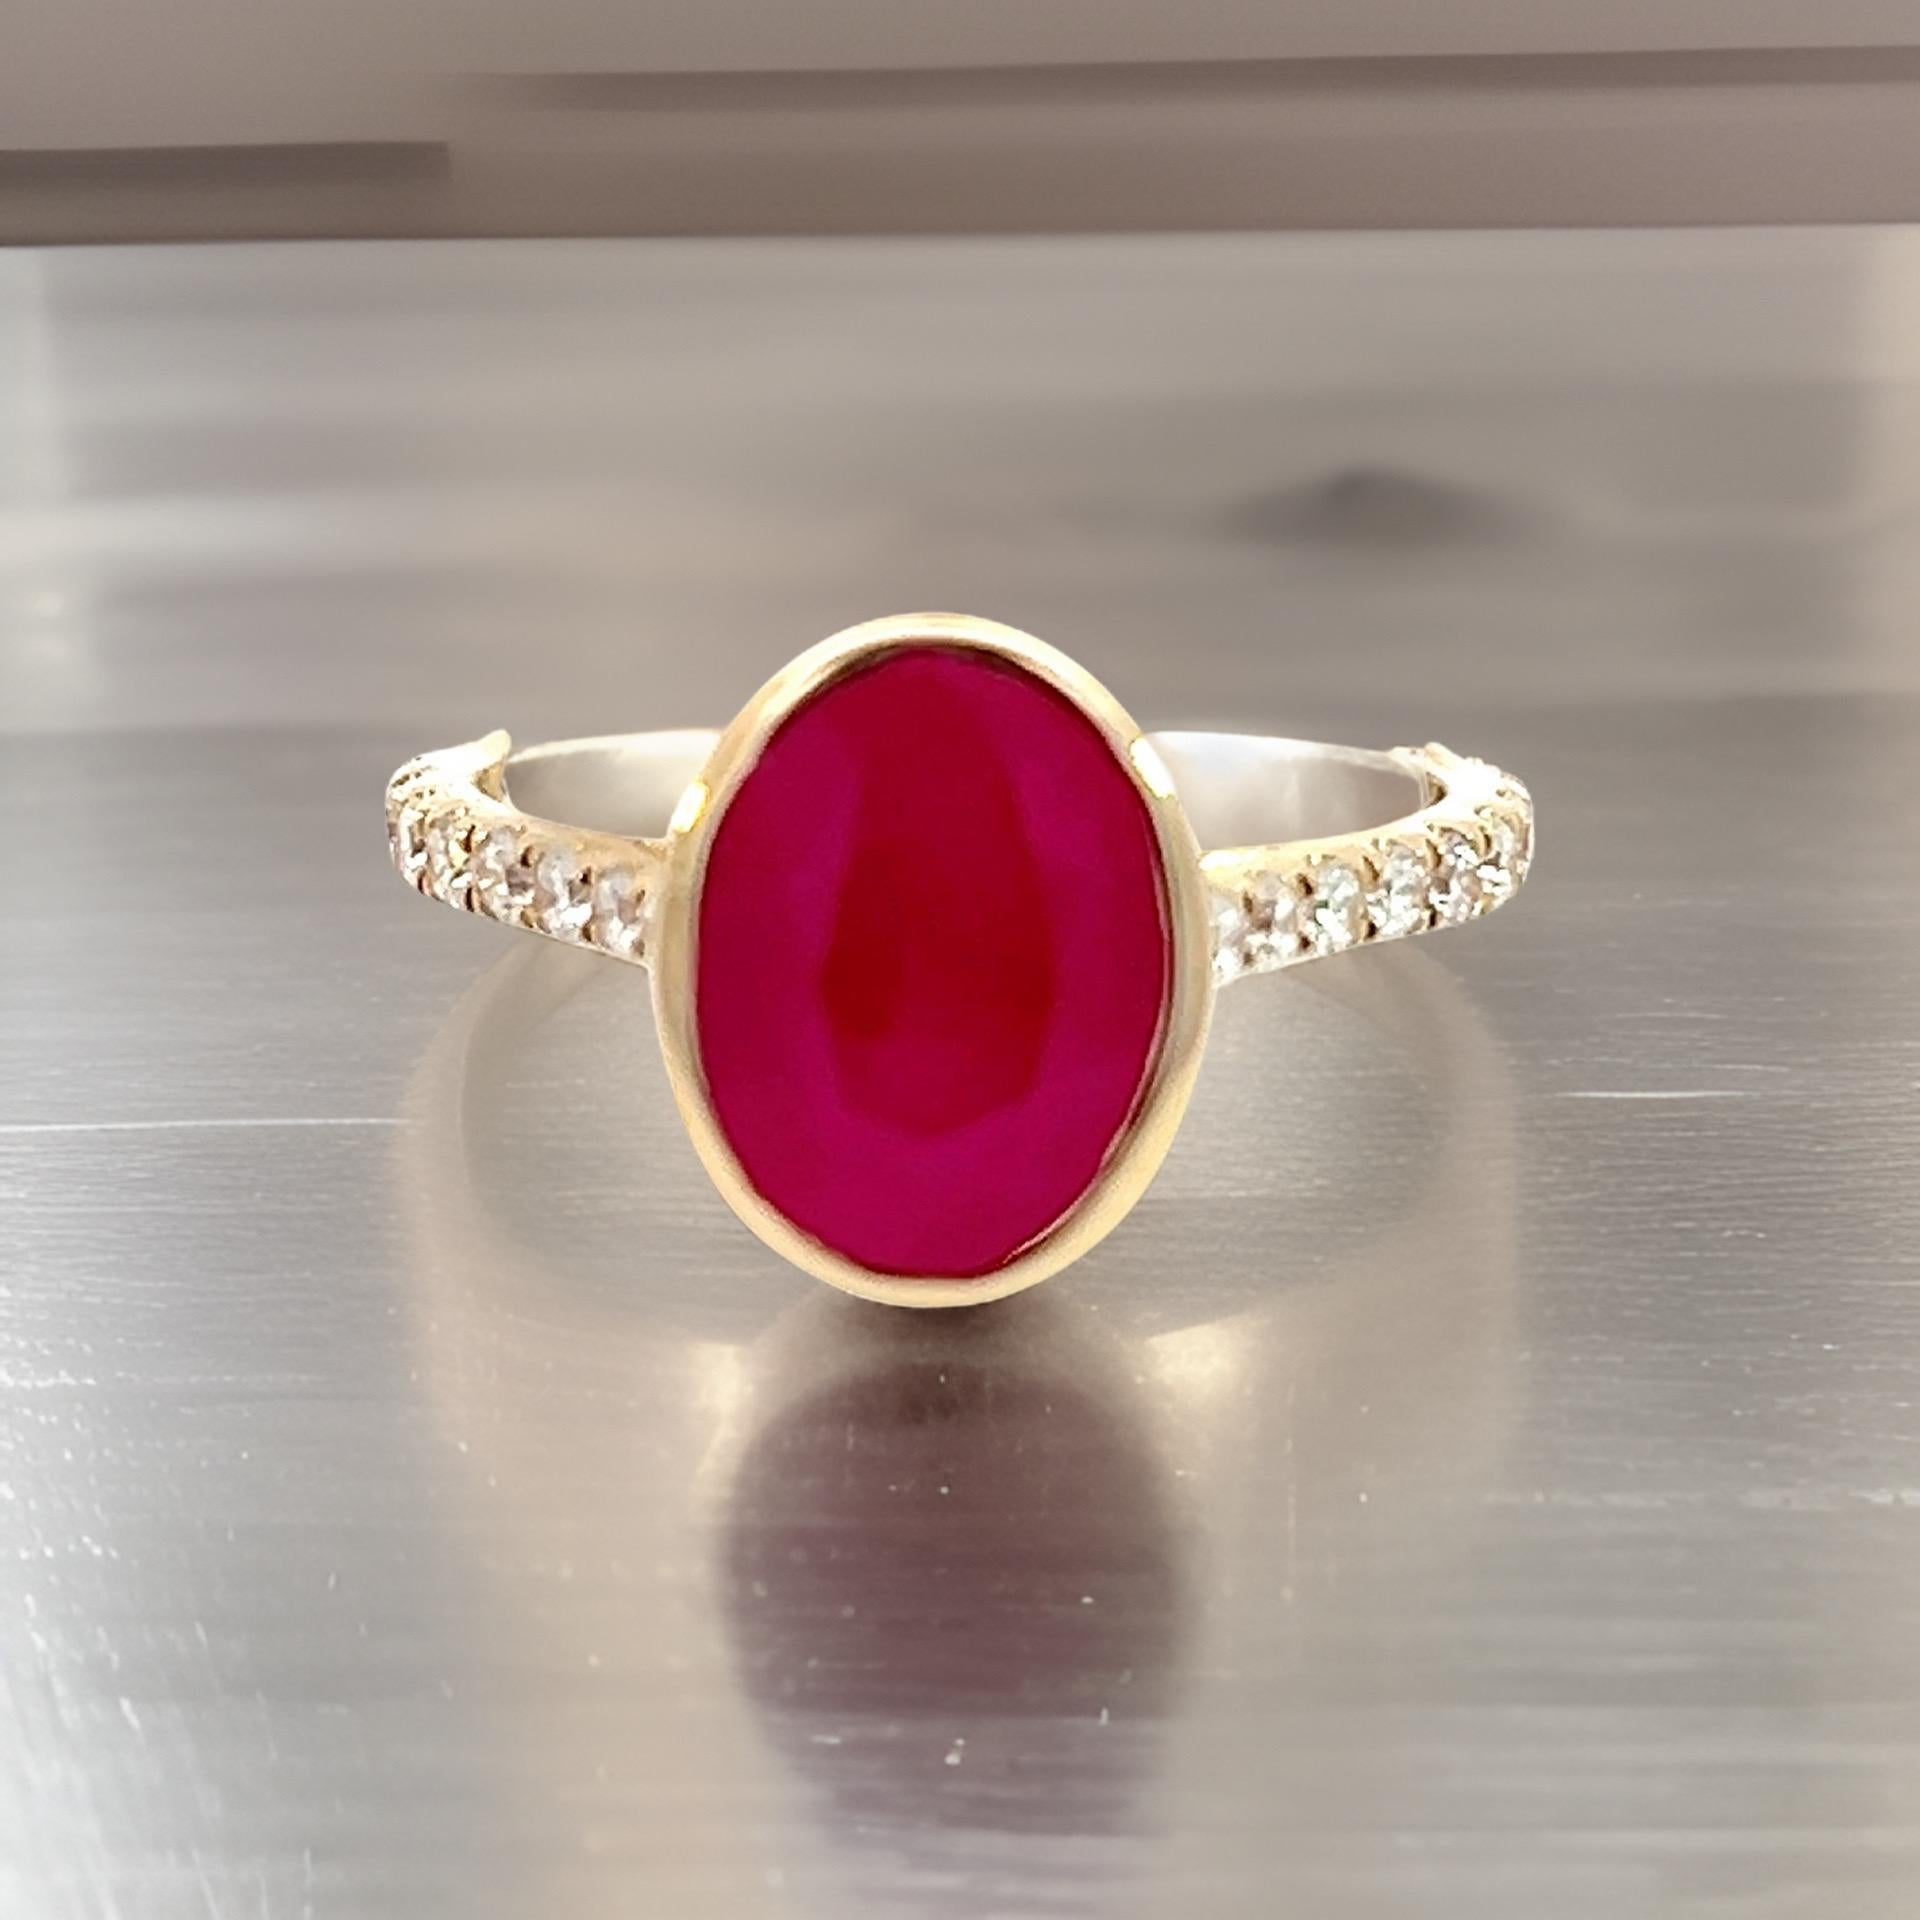 Oval Cut Natural Ruby Diamond Ring 6.75 14k Y Gold 4.38 TCW Certified For Sale